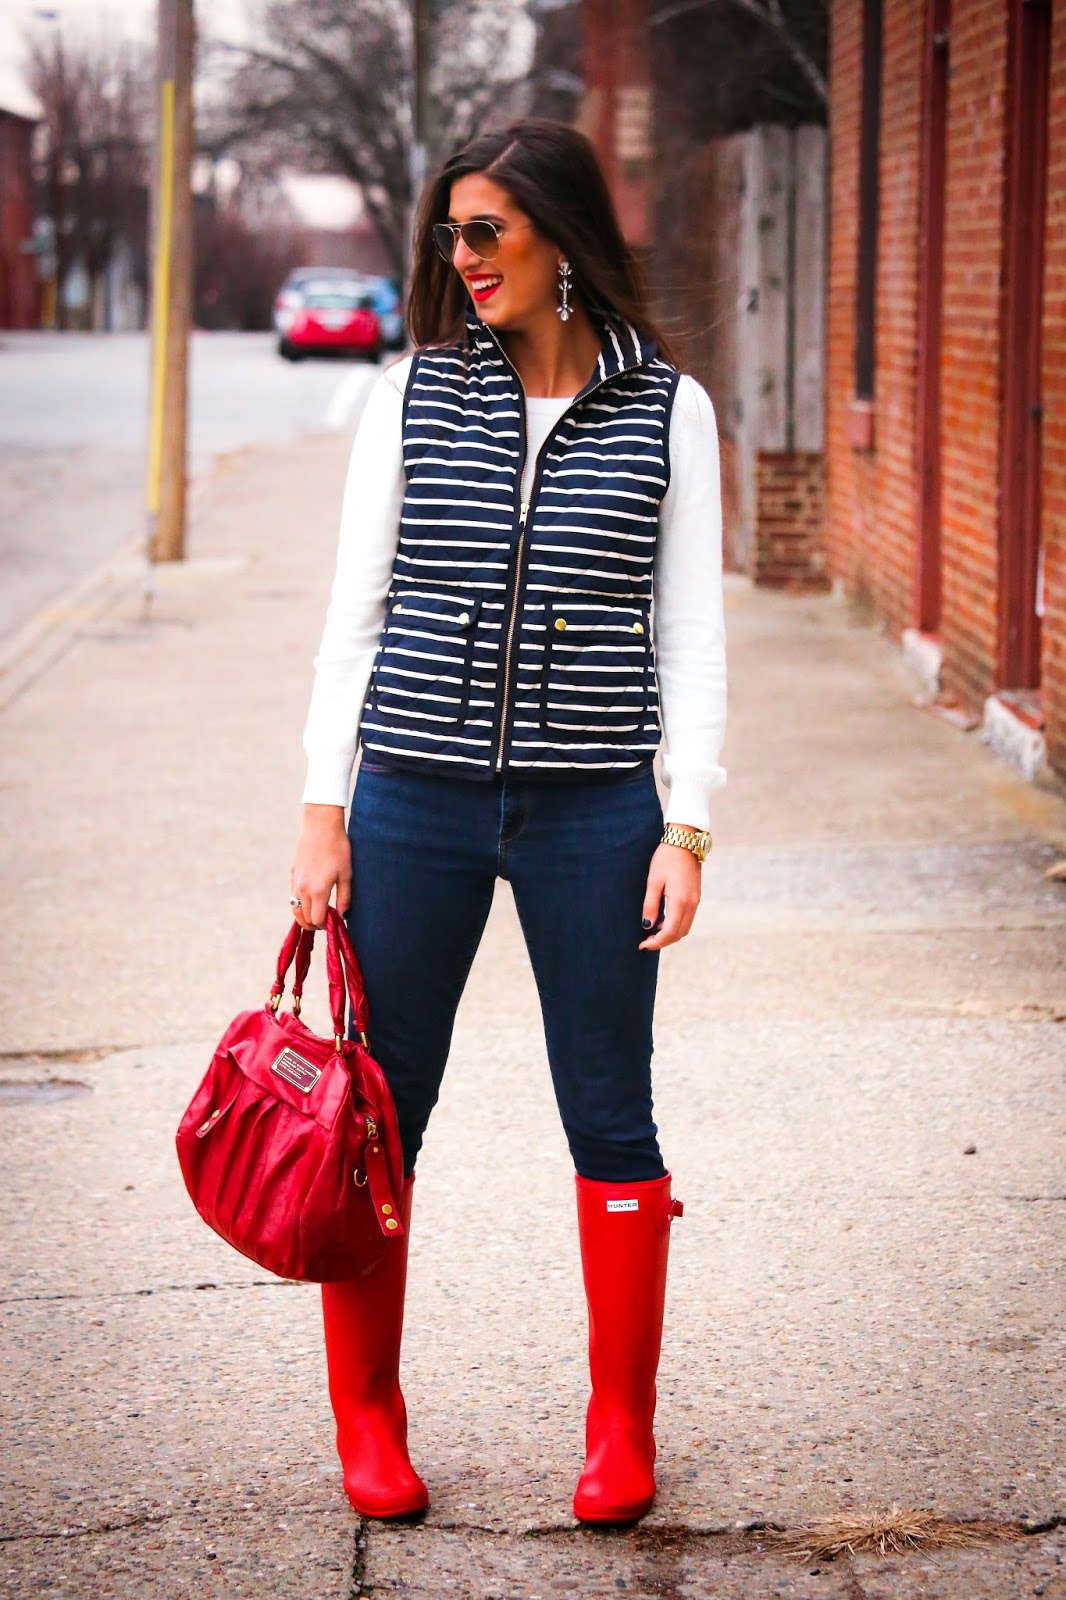 Sequins and Stripes | A Southern Drawl